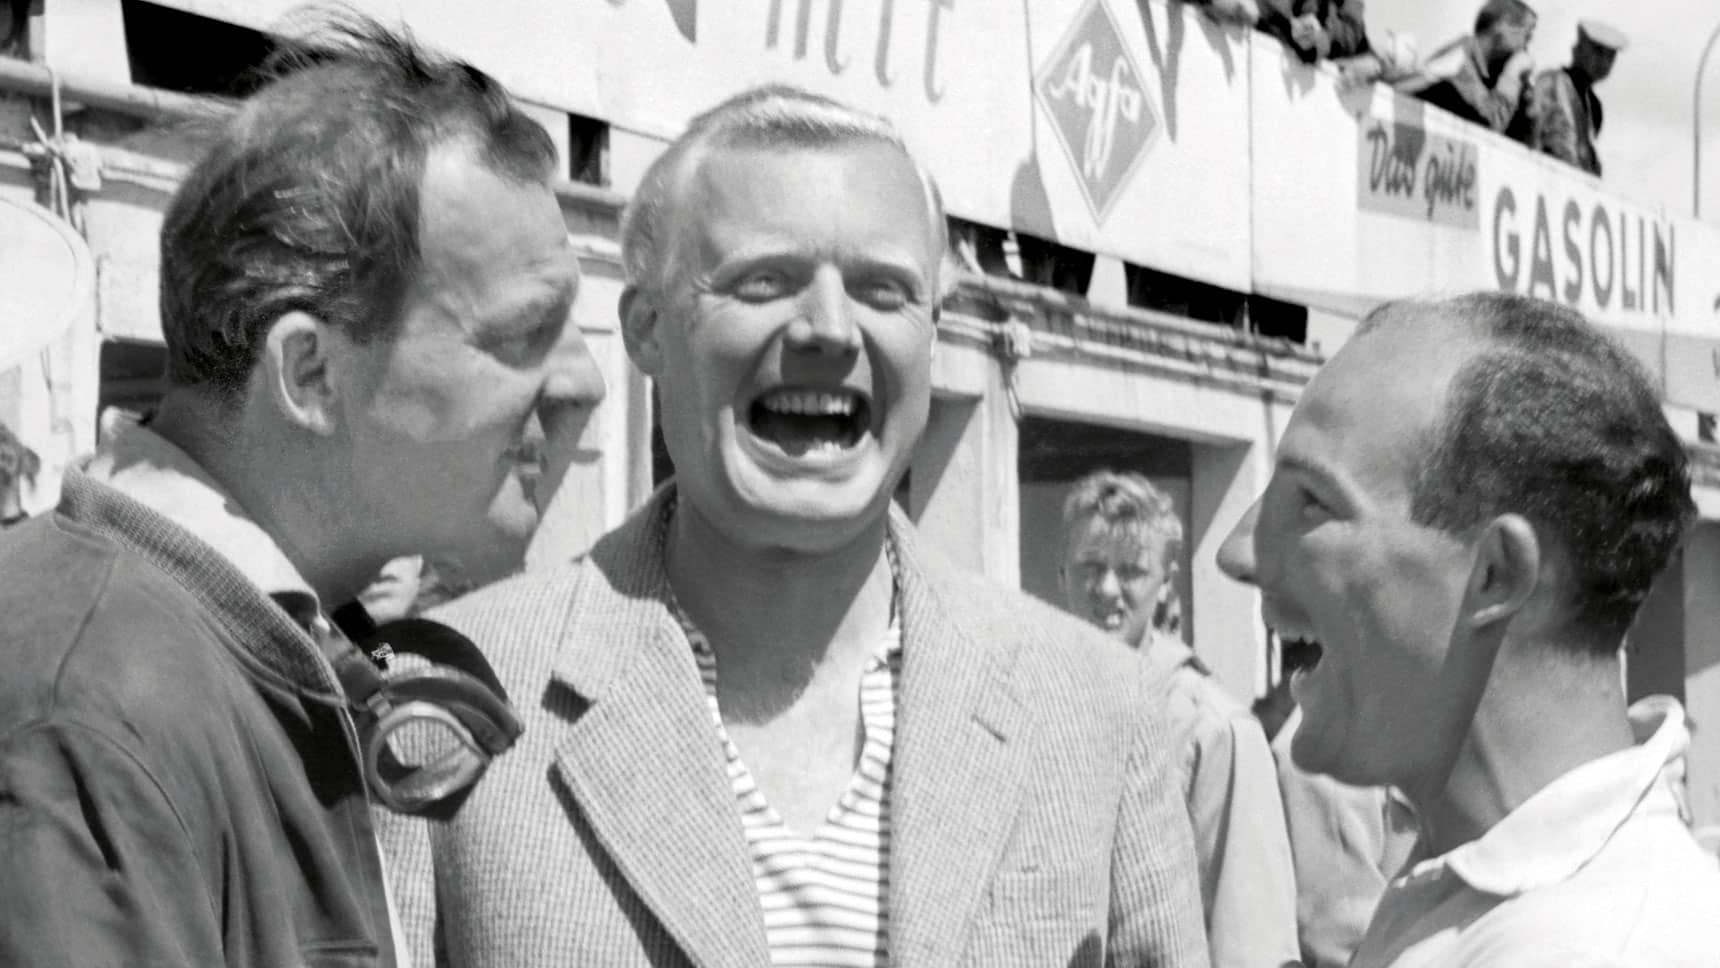 Stirling Moss with Mike Hawthorn